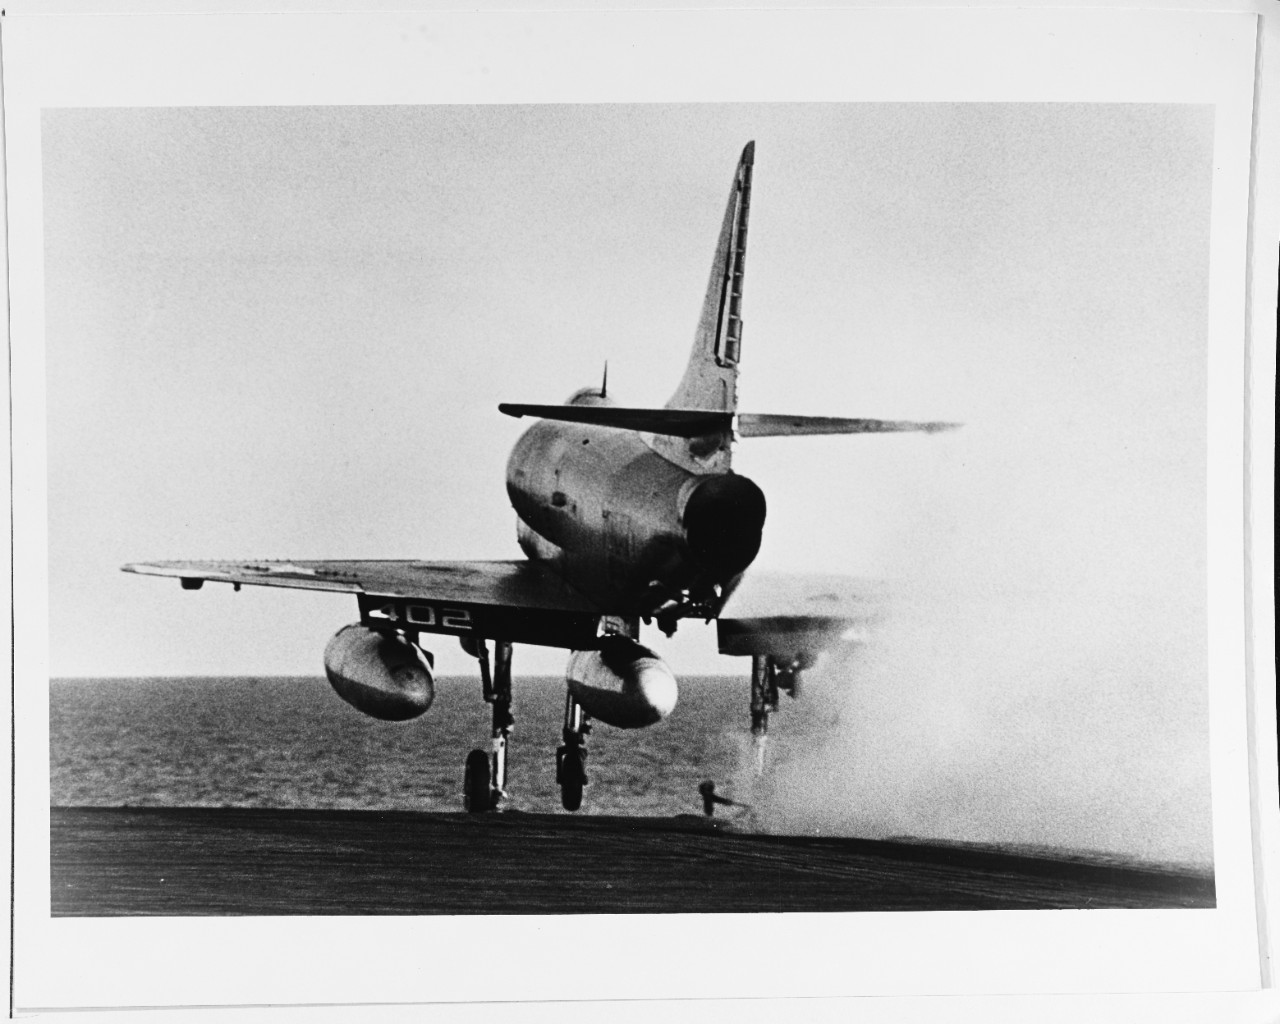 An A-4 "Skyhawk" is launched